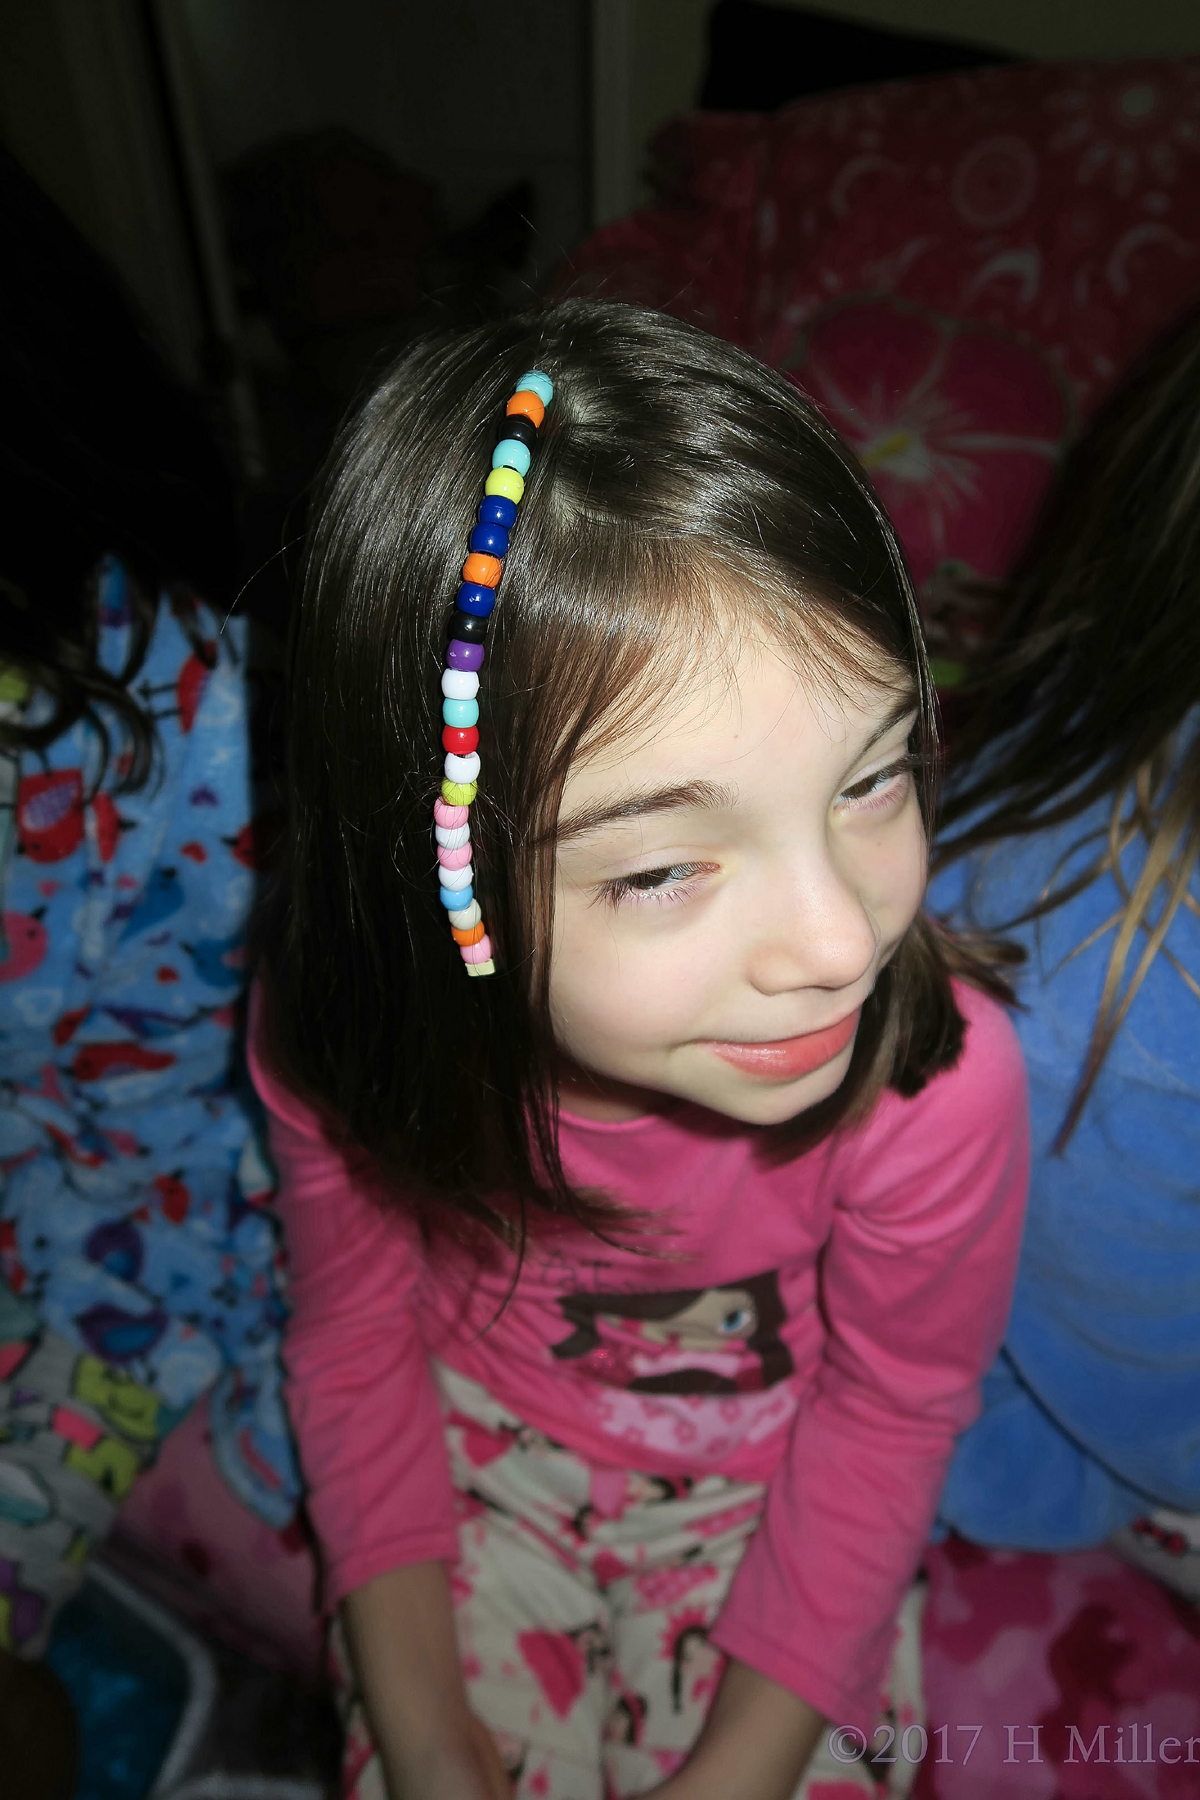 Beaded Girls Hairstyle With All The Colors Of The Rainbow! 